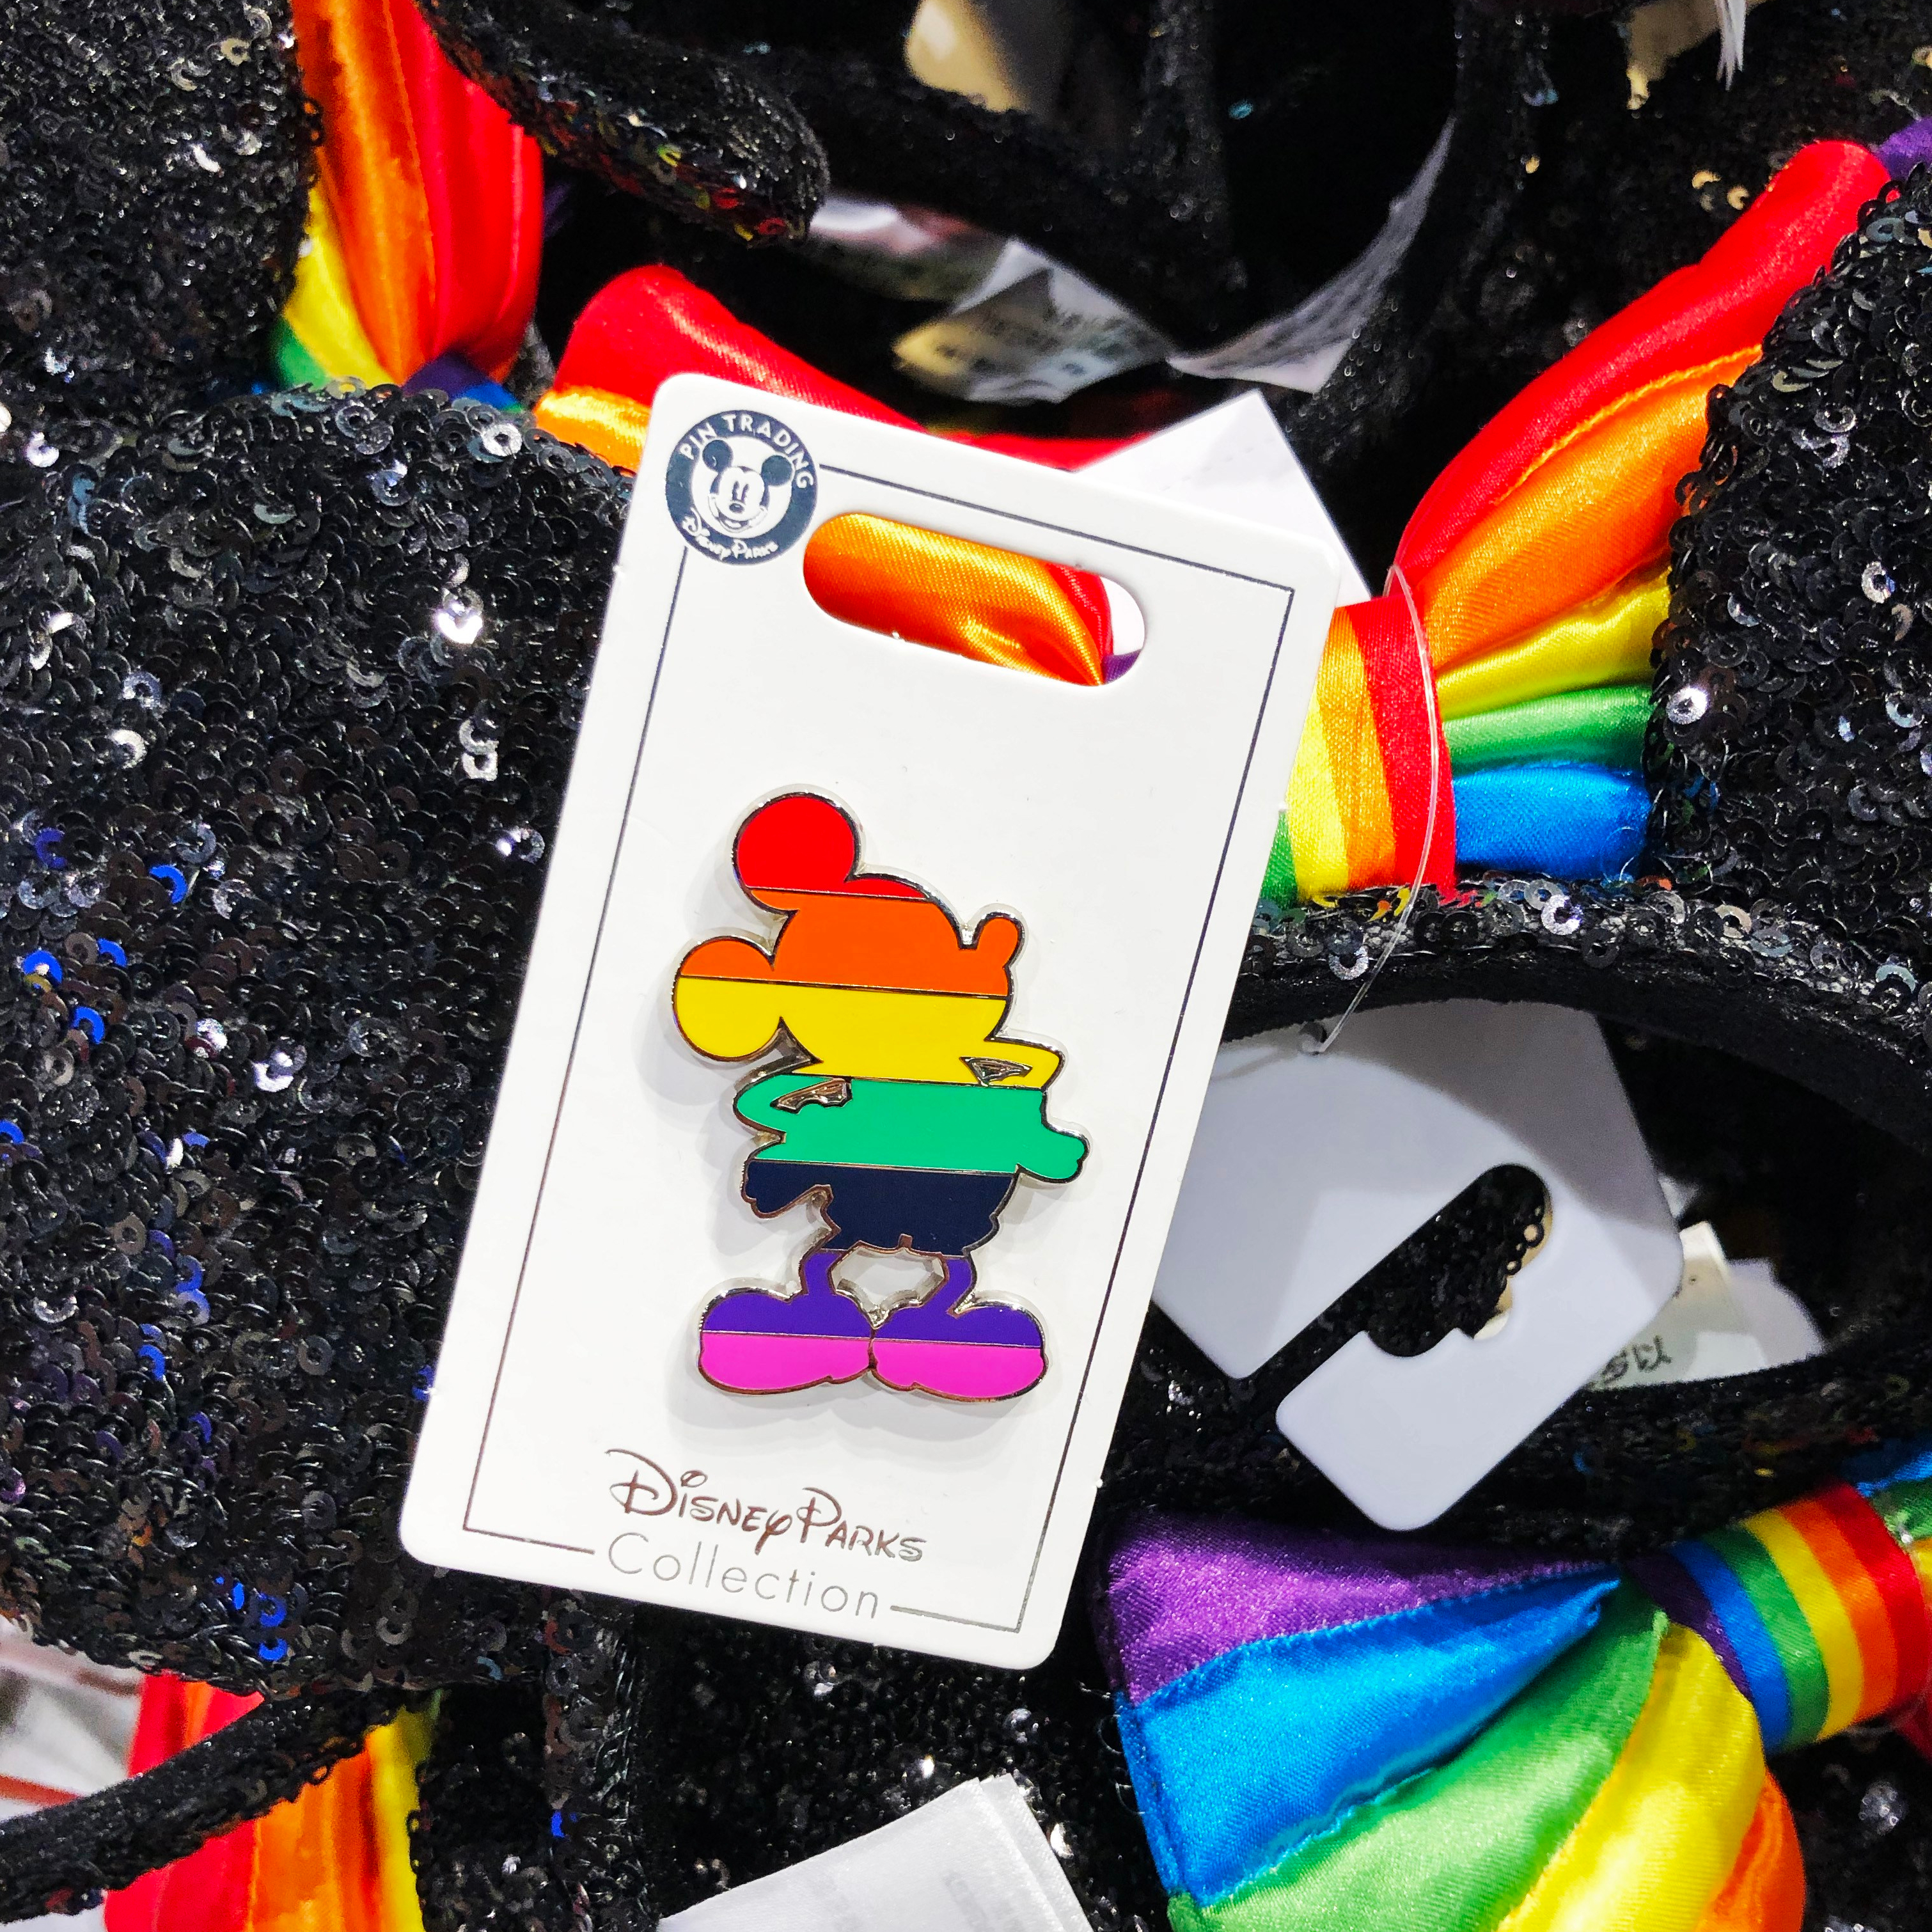 Rainbow-striped pin shaped of body of Mickey Mouse laying on top of black sequined Minnie ears with rainbow bow.